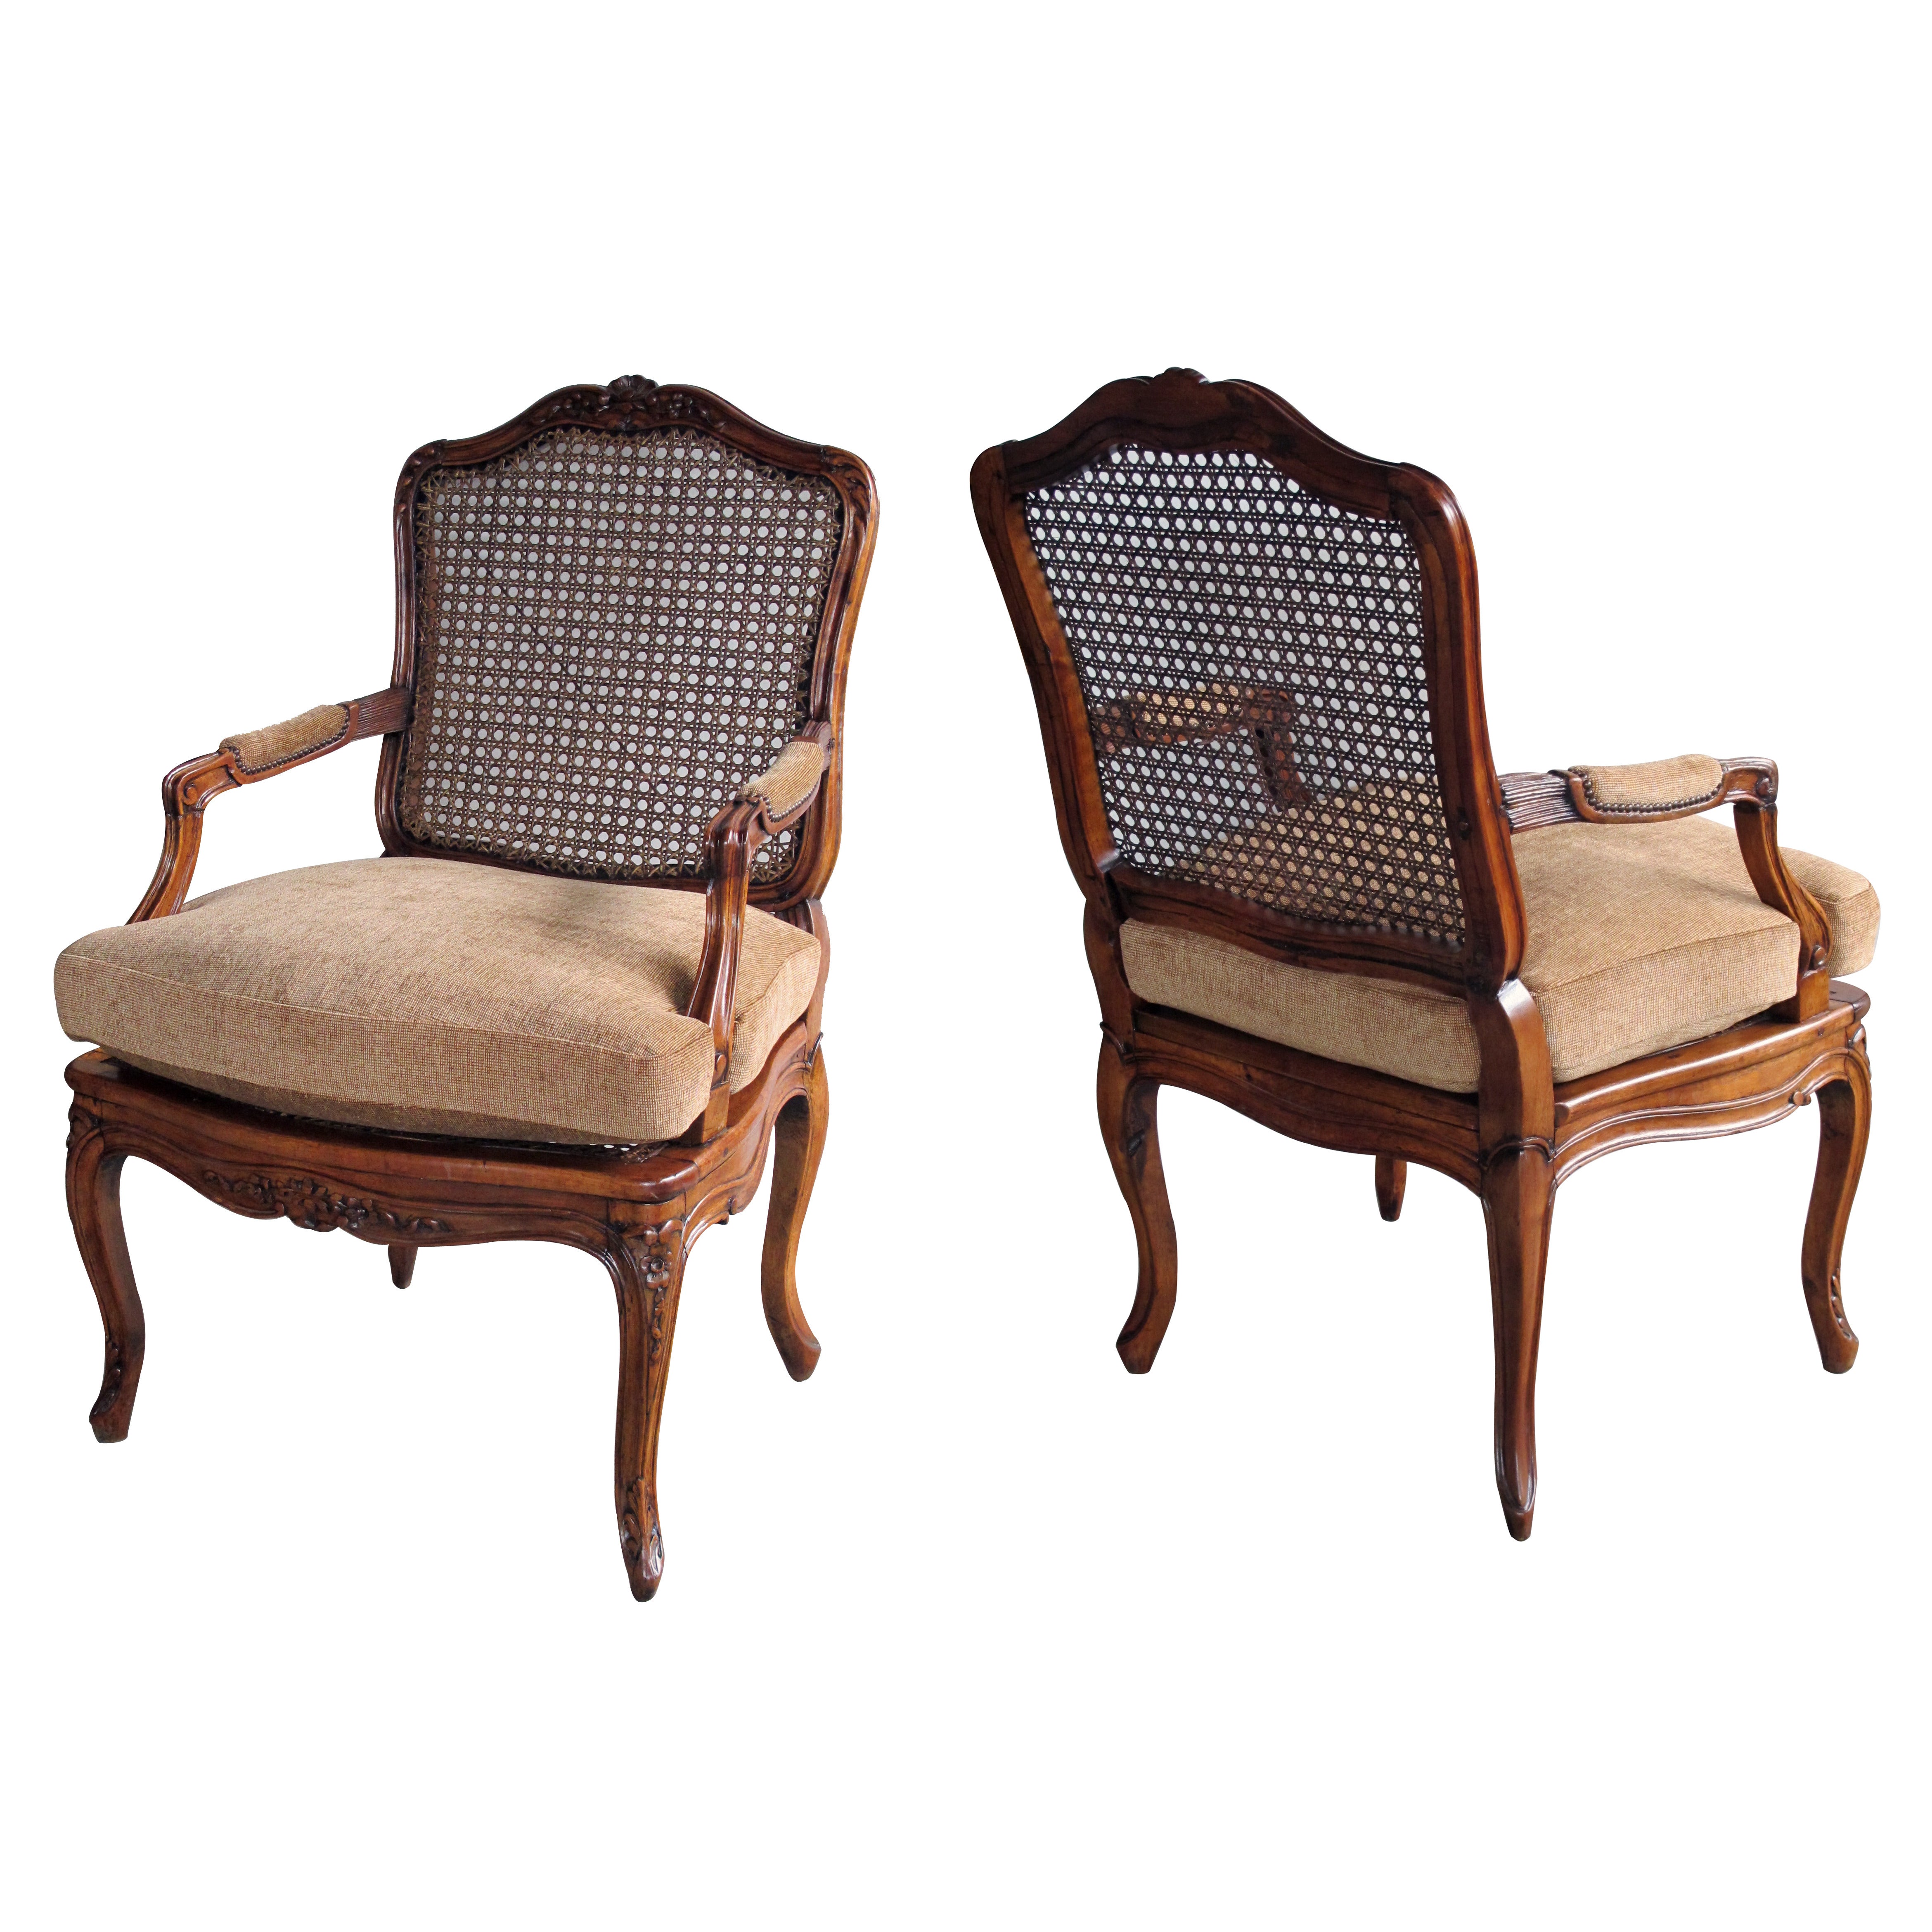 Elegant Pair of French Rococo Beechwood Open Arm Chairs with Caned Seat and Back